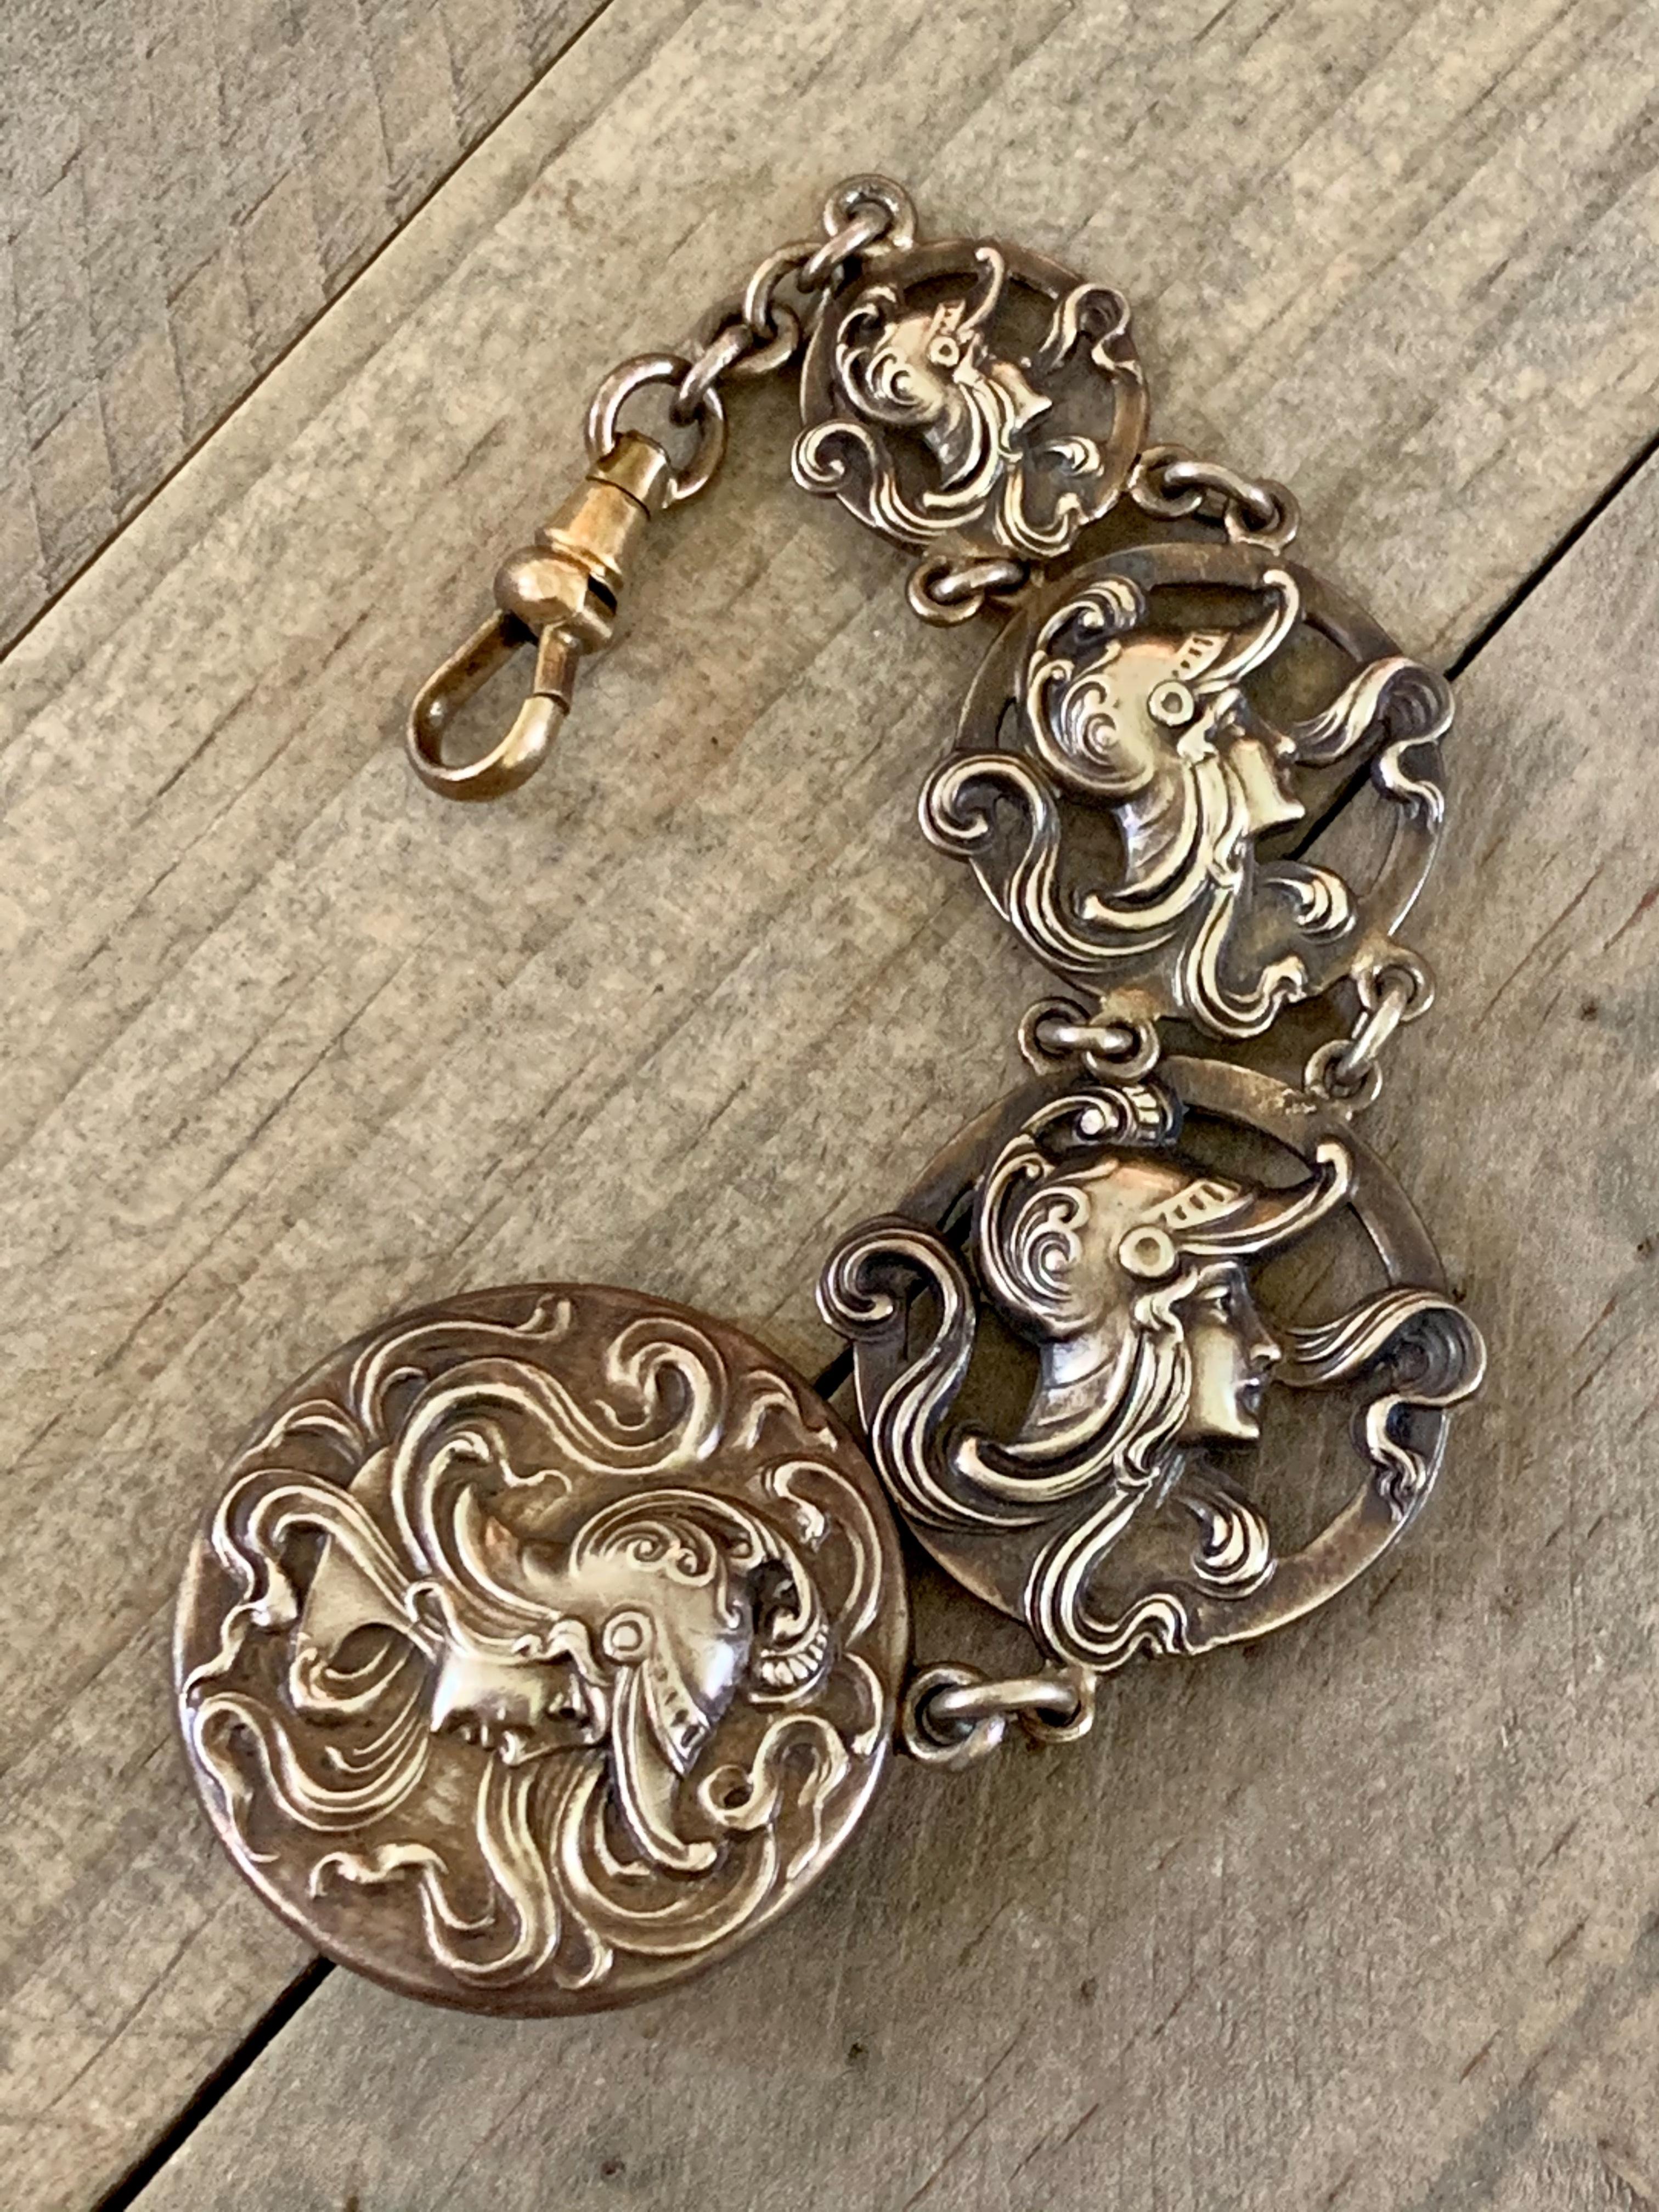 This vintage Art Nouveau watch fob features four Sterling Silver panels which each have a relief of a soldier's head.  

There is no stamp.

Fob length measures approximately 6